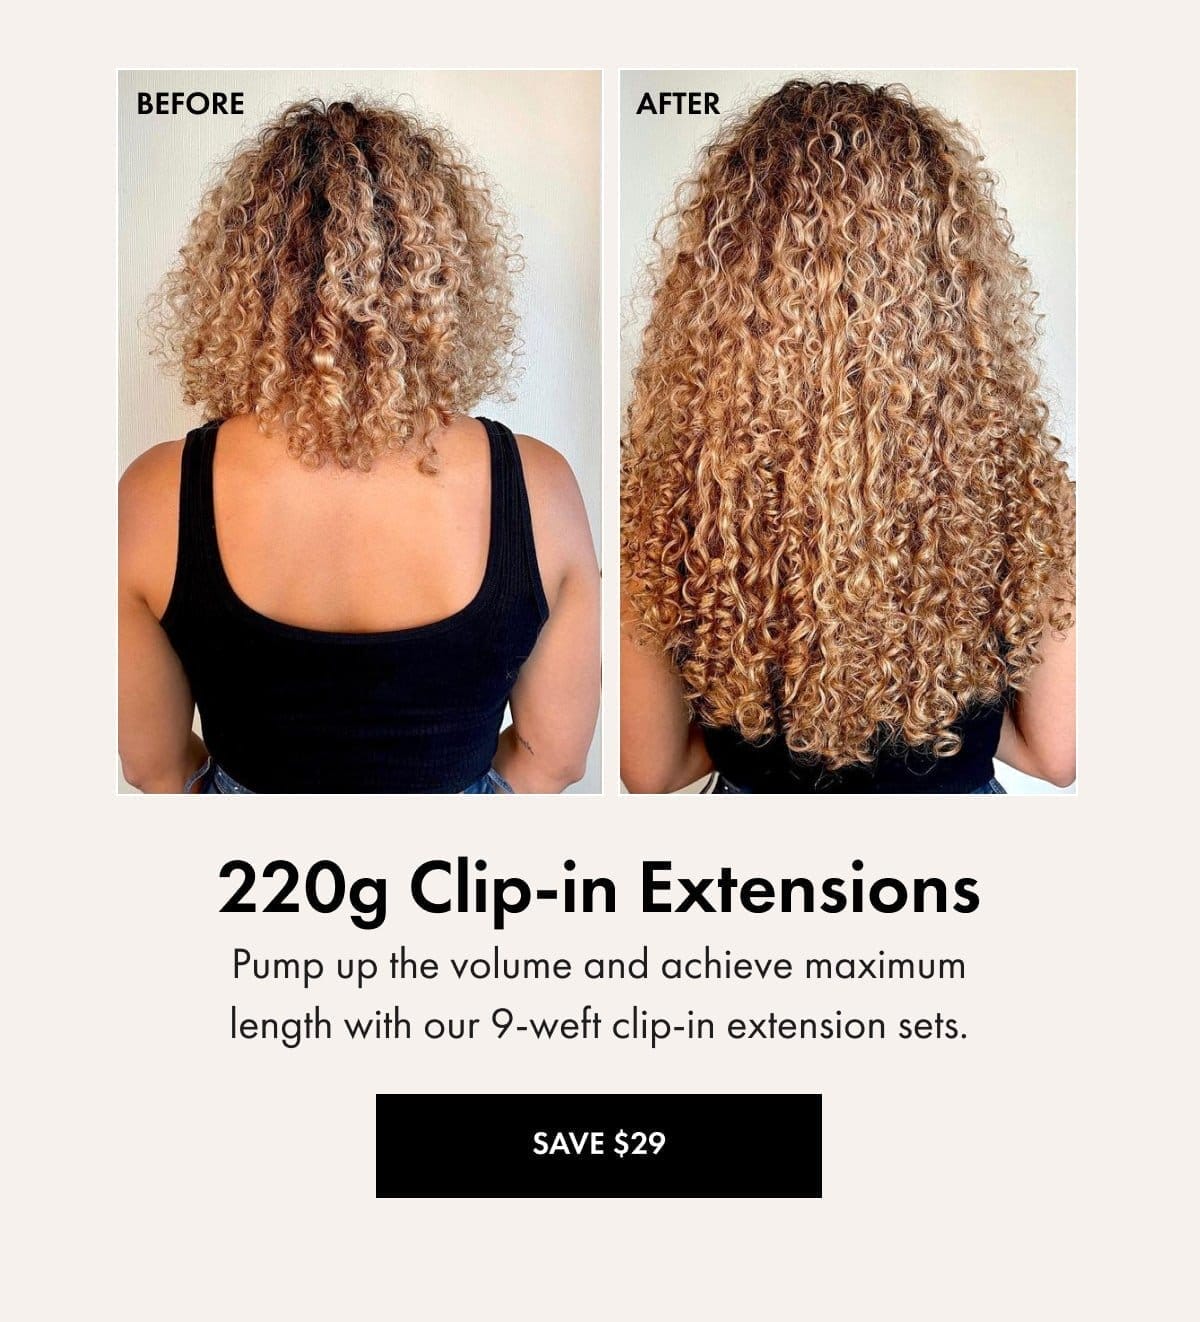 220g Clip-in Extensions: Pump up the volume and achieve maximum length with our 9-weft clip-in extension sets. SAVE \\$29 WITH CODE: SAVE29